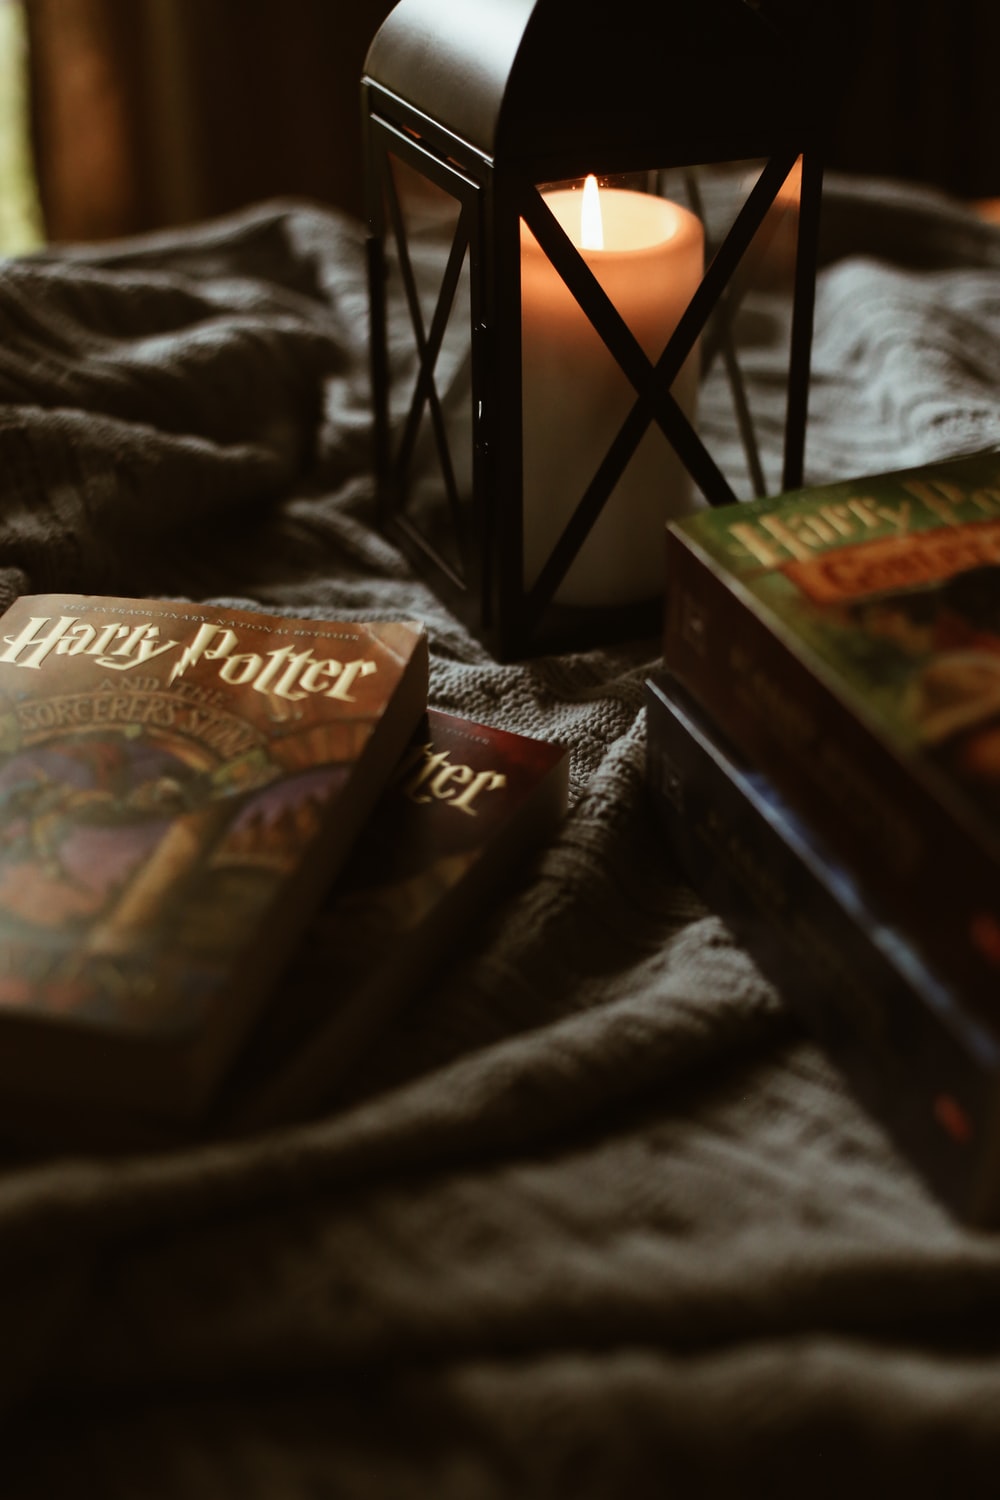 Harry Potter Books Wallpapers